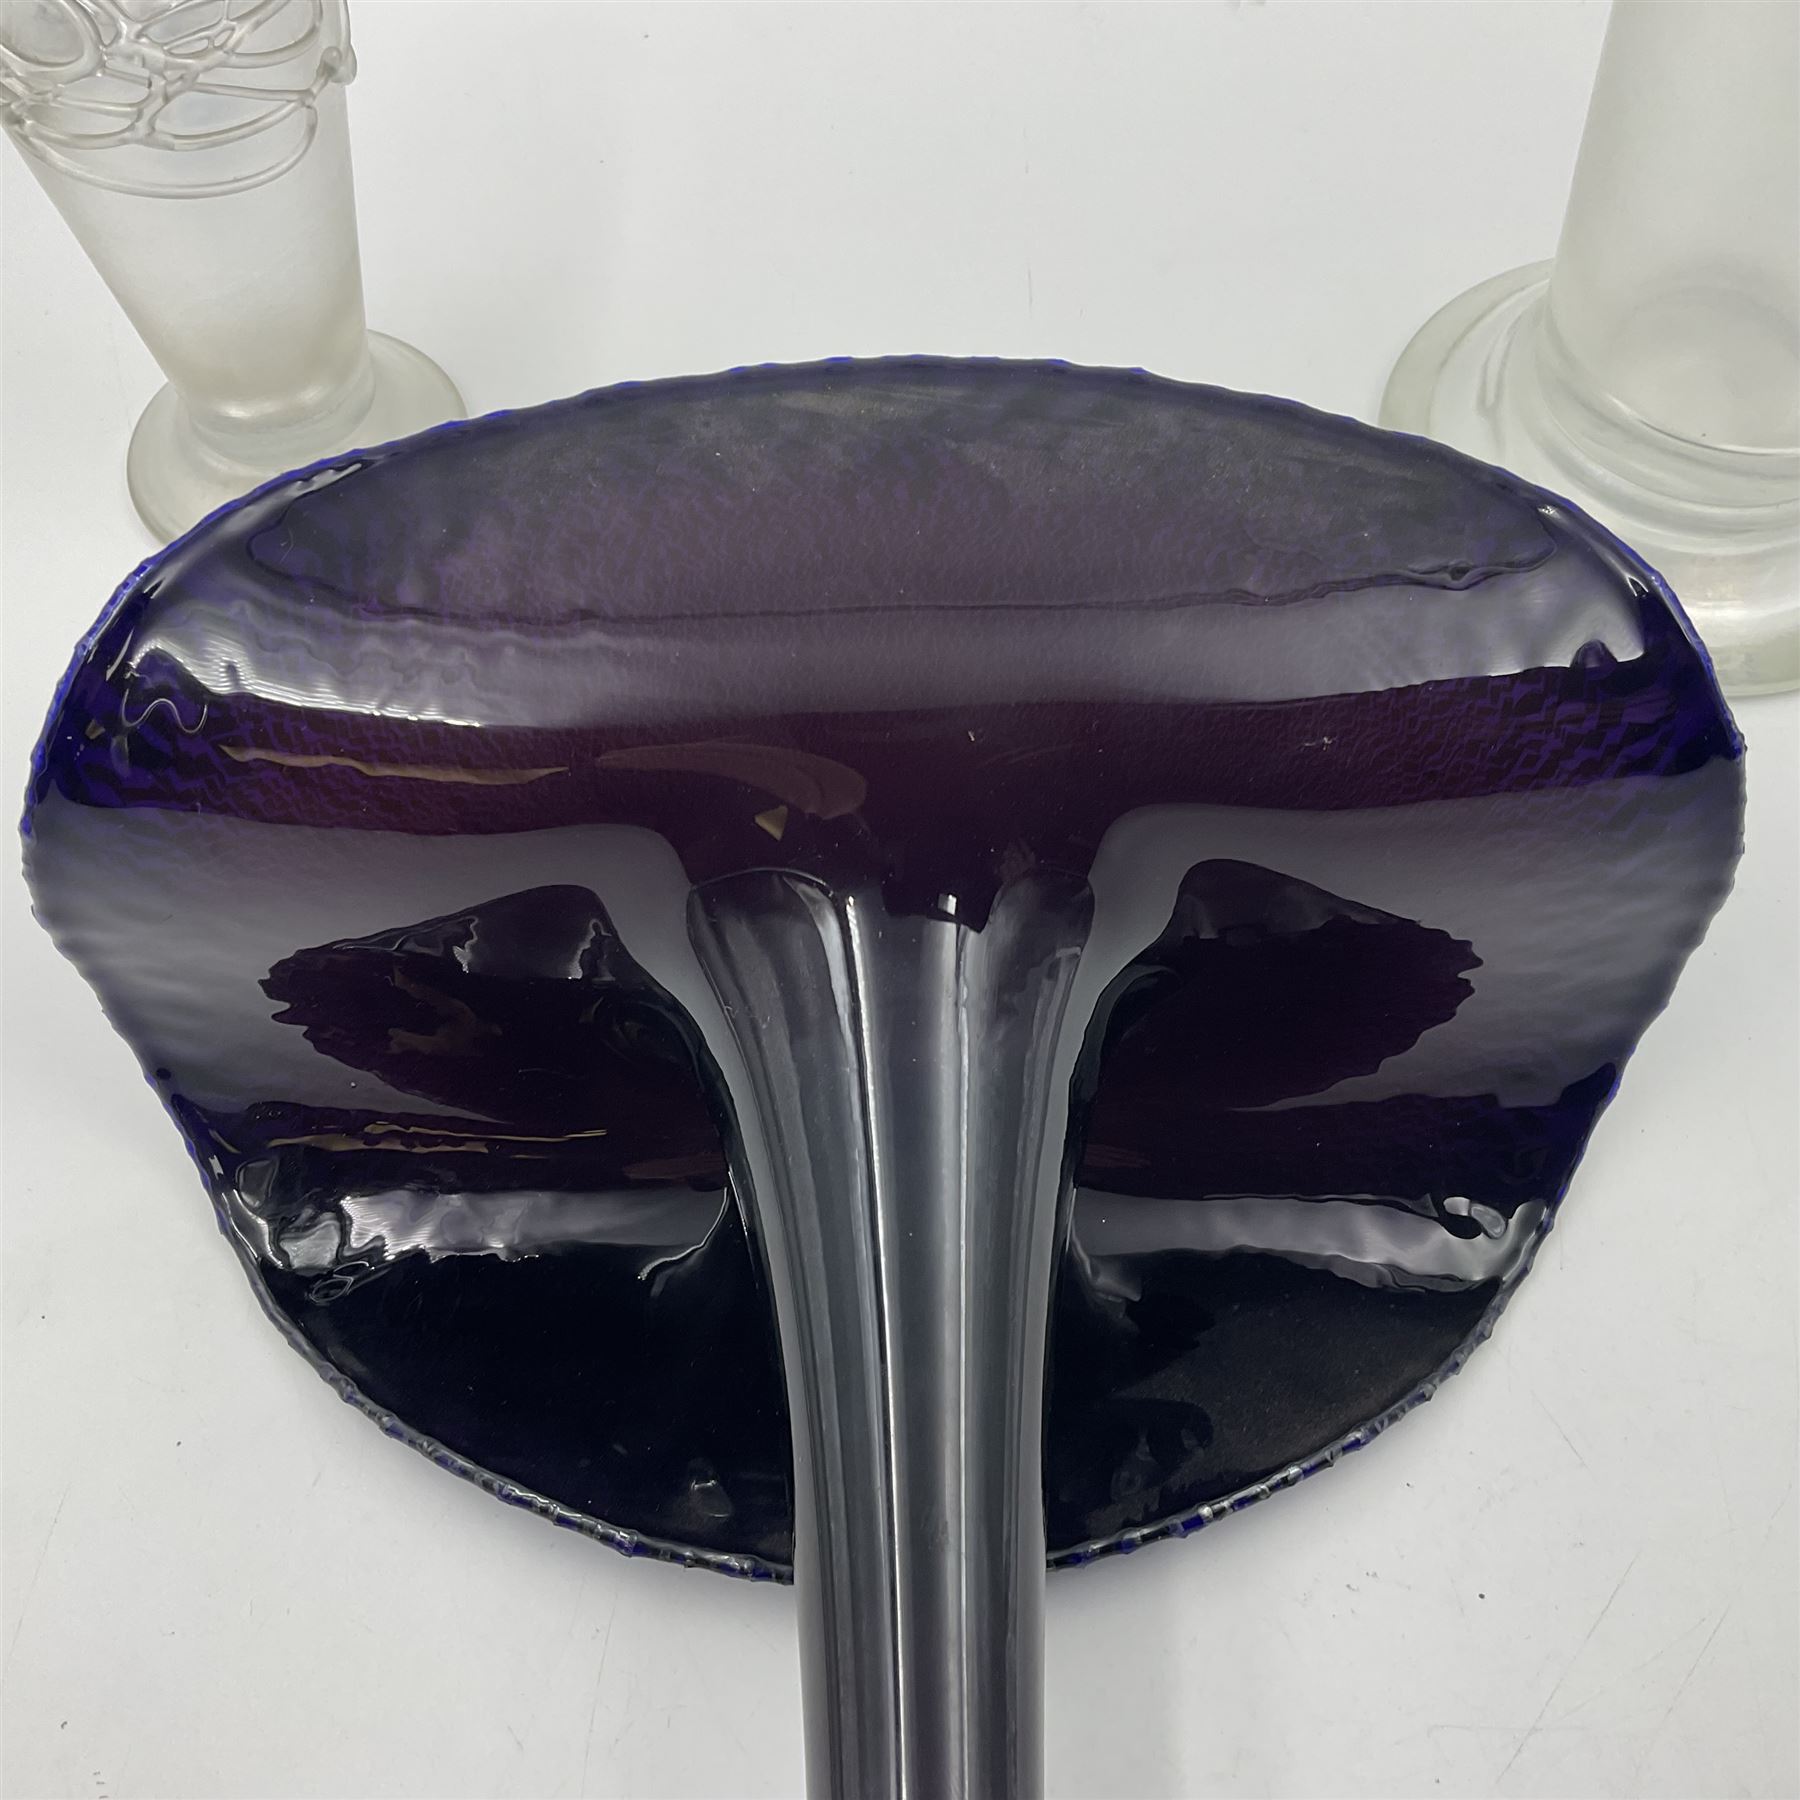 20th Century studio glass Okra Jack in the Pulpit vase - Image 6 of 16